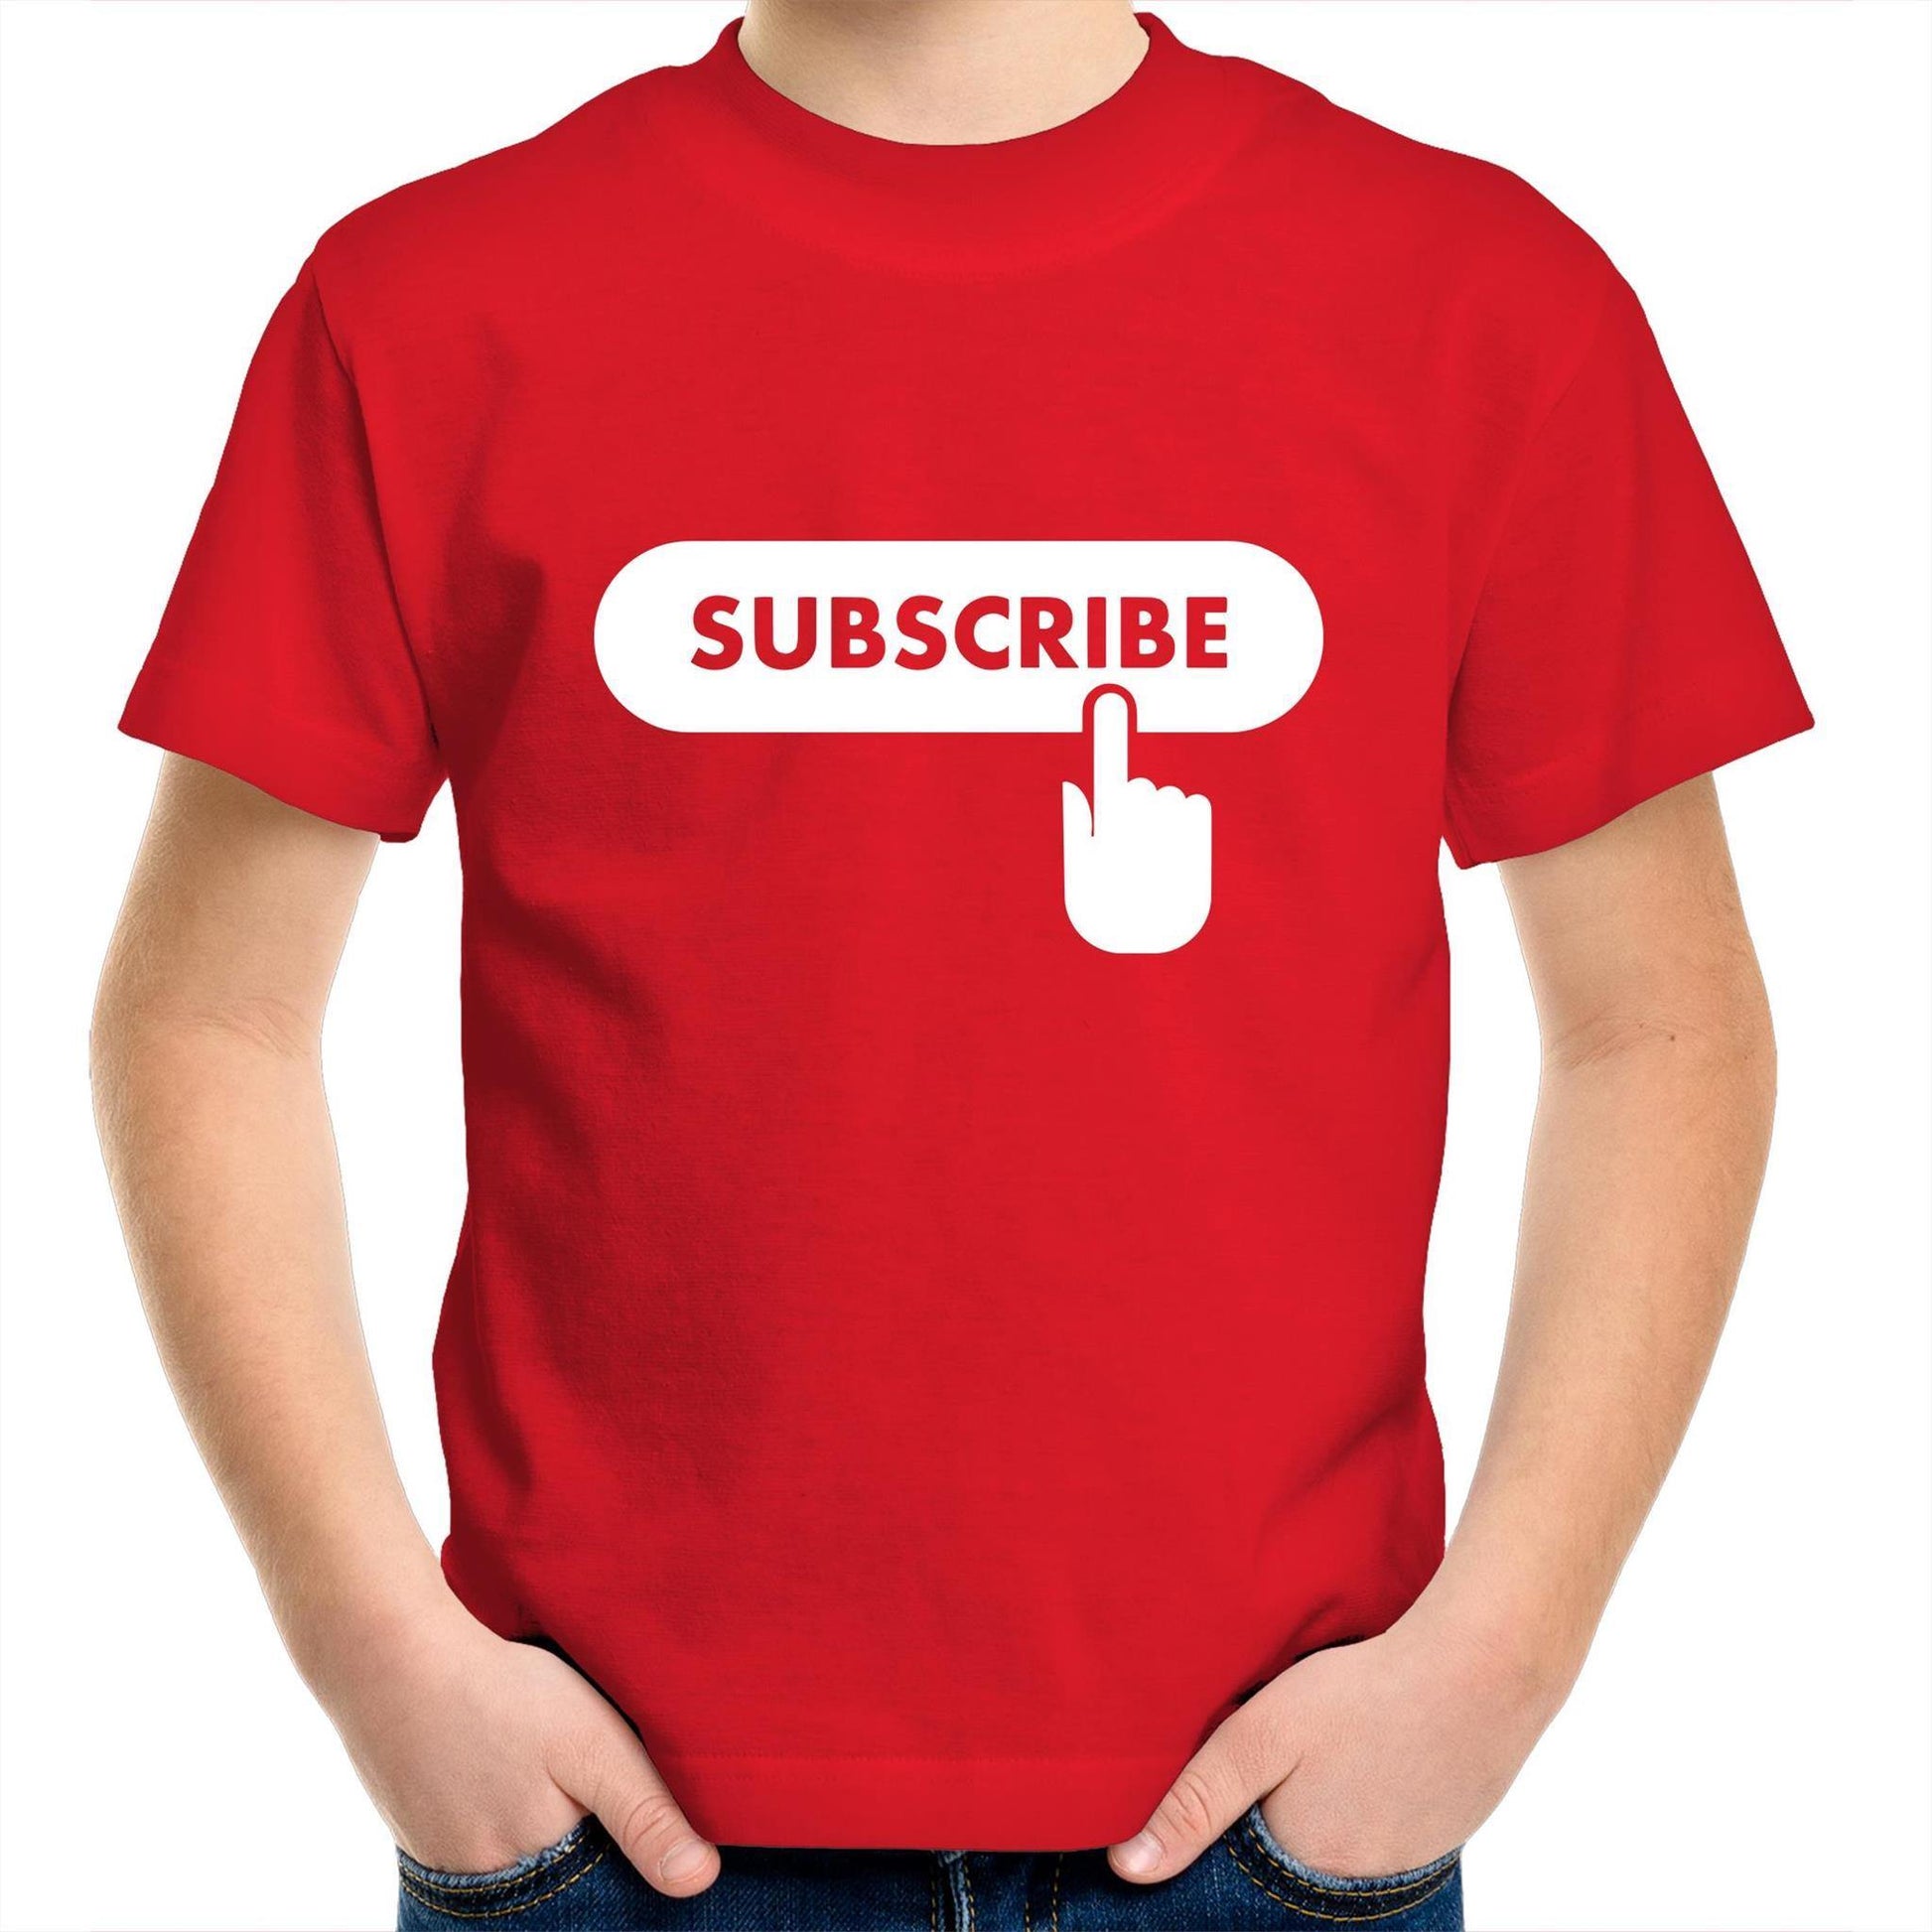 Subscribe - Kids Youth Crew T-Shirt Red Kids Youth T-shirt Funny